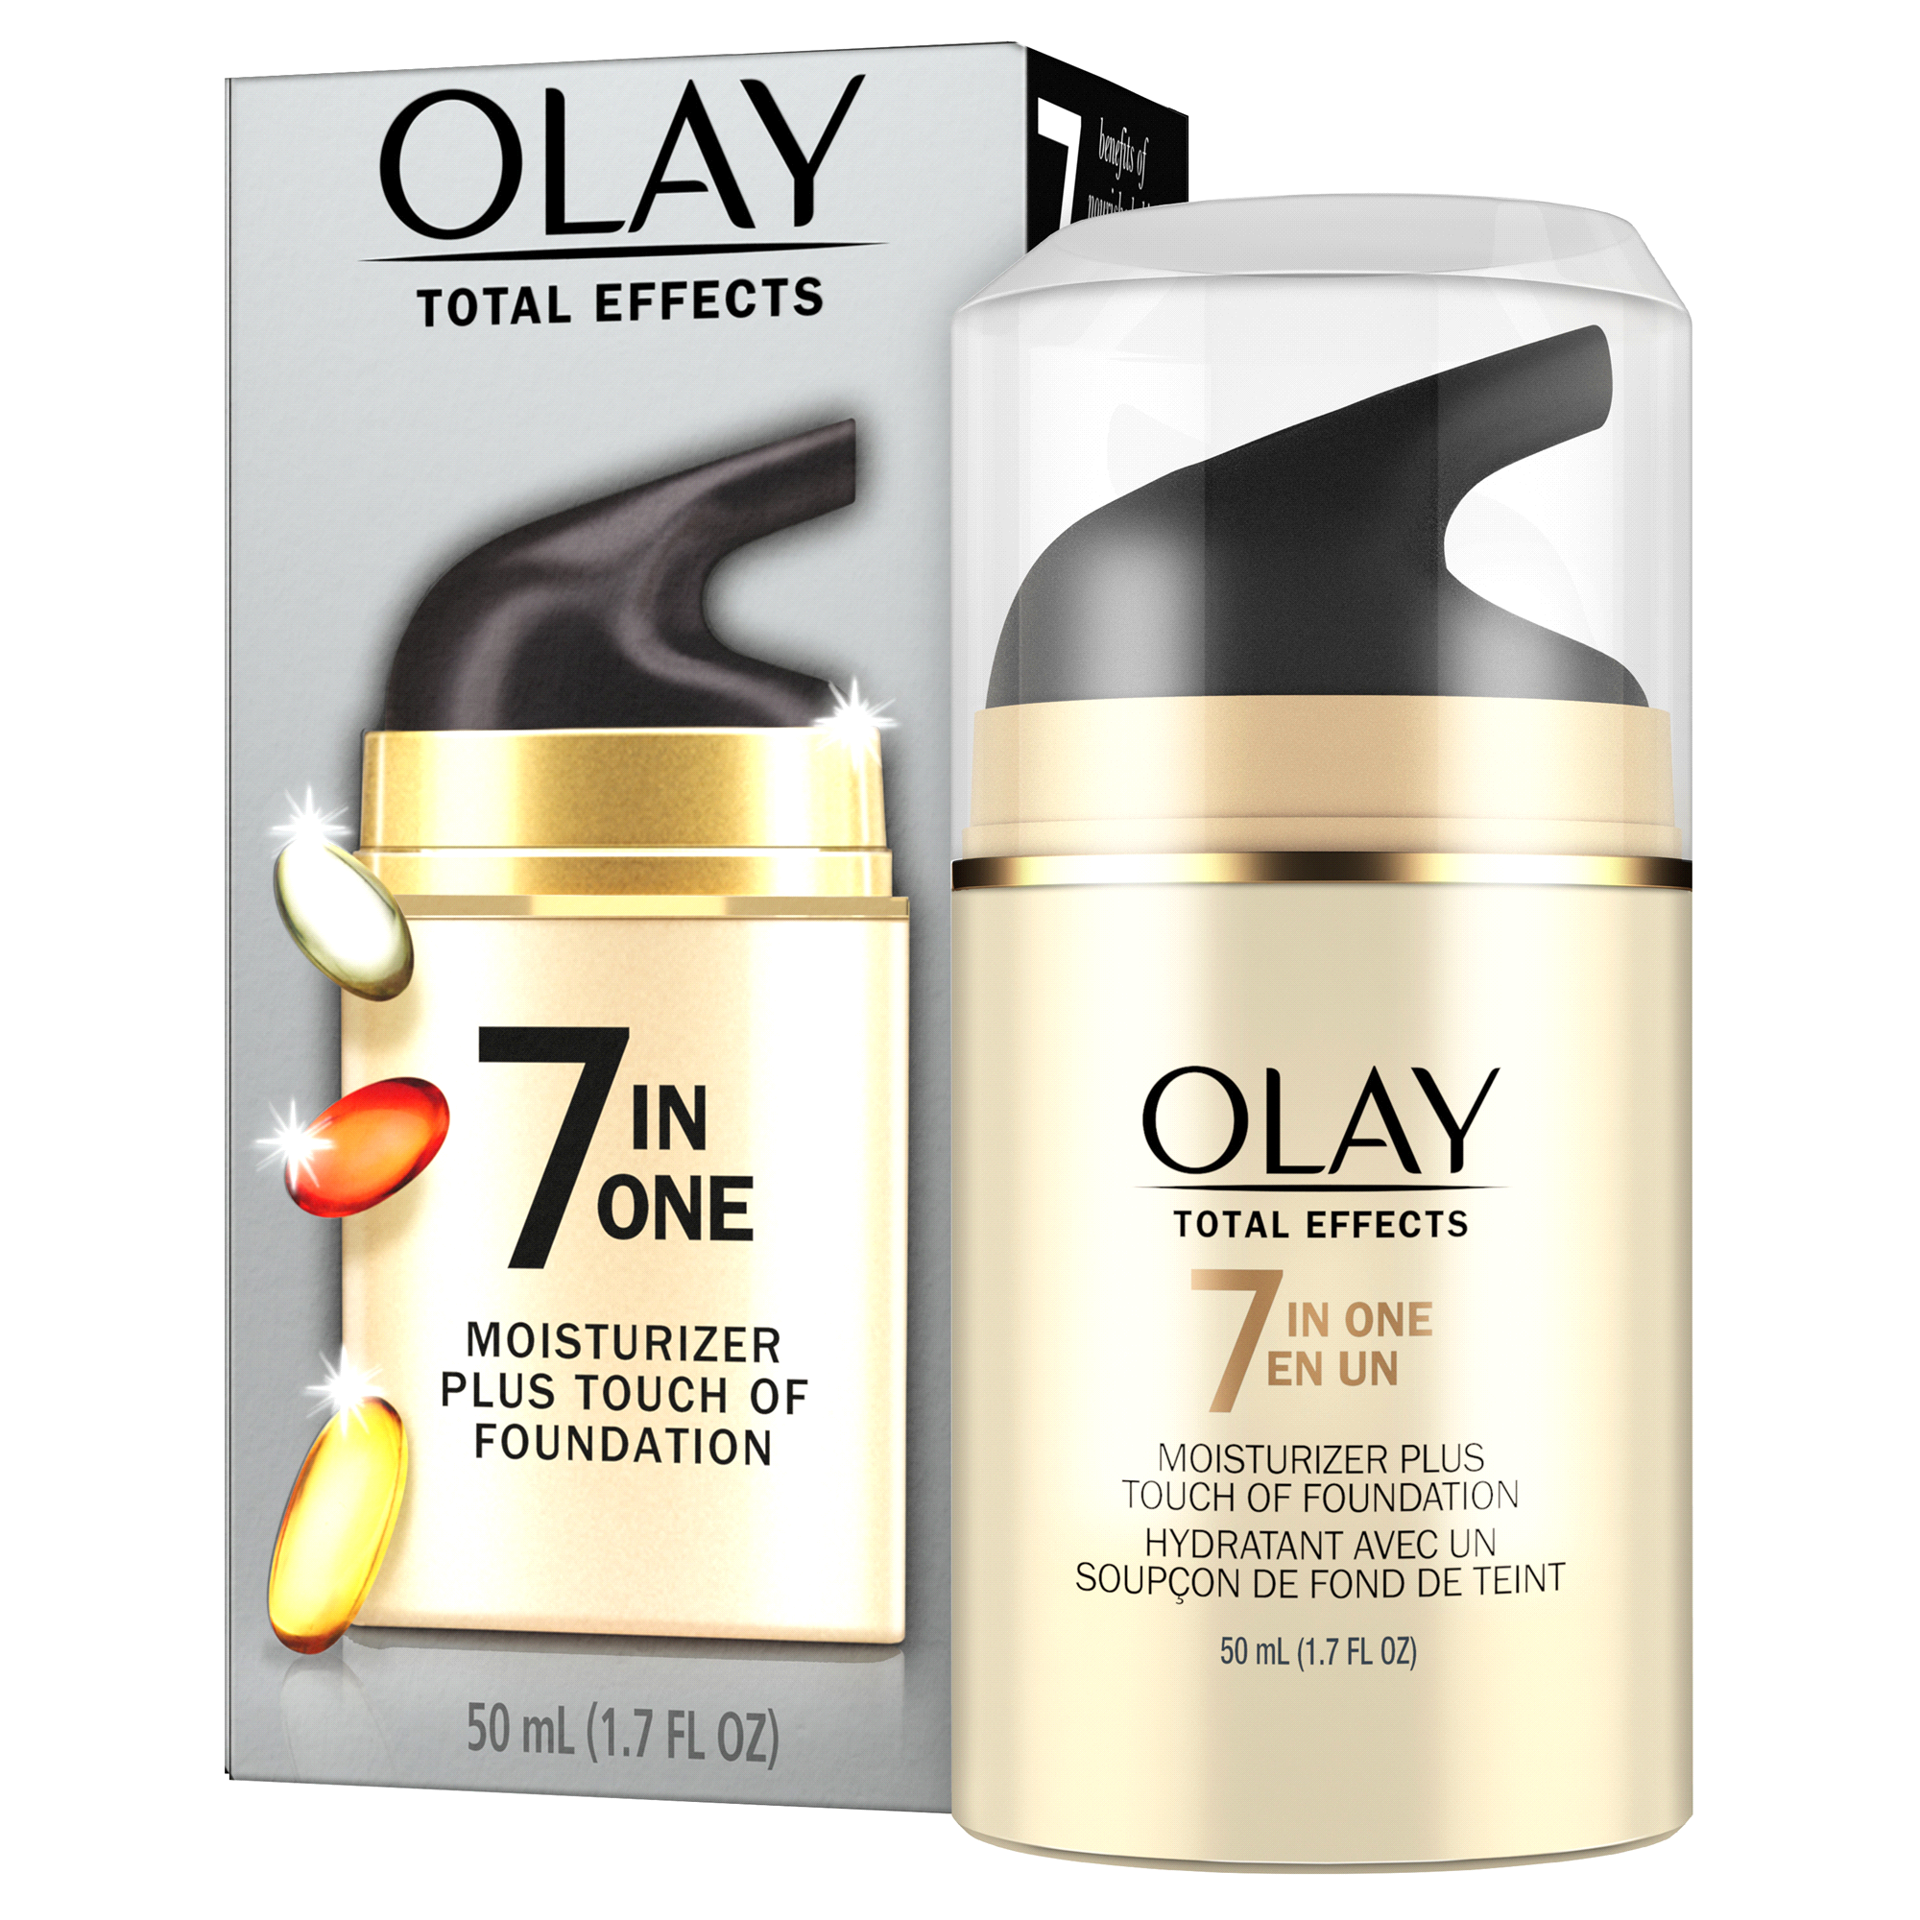 slide 15 of 29, Olay Total Effects Face Moisturizer + Touch of Foundation, 1.7 fl oz, 1.7 fl oz